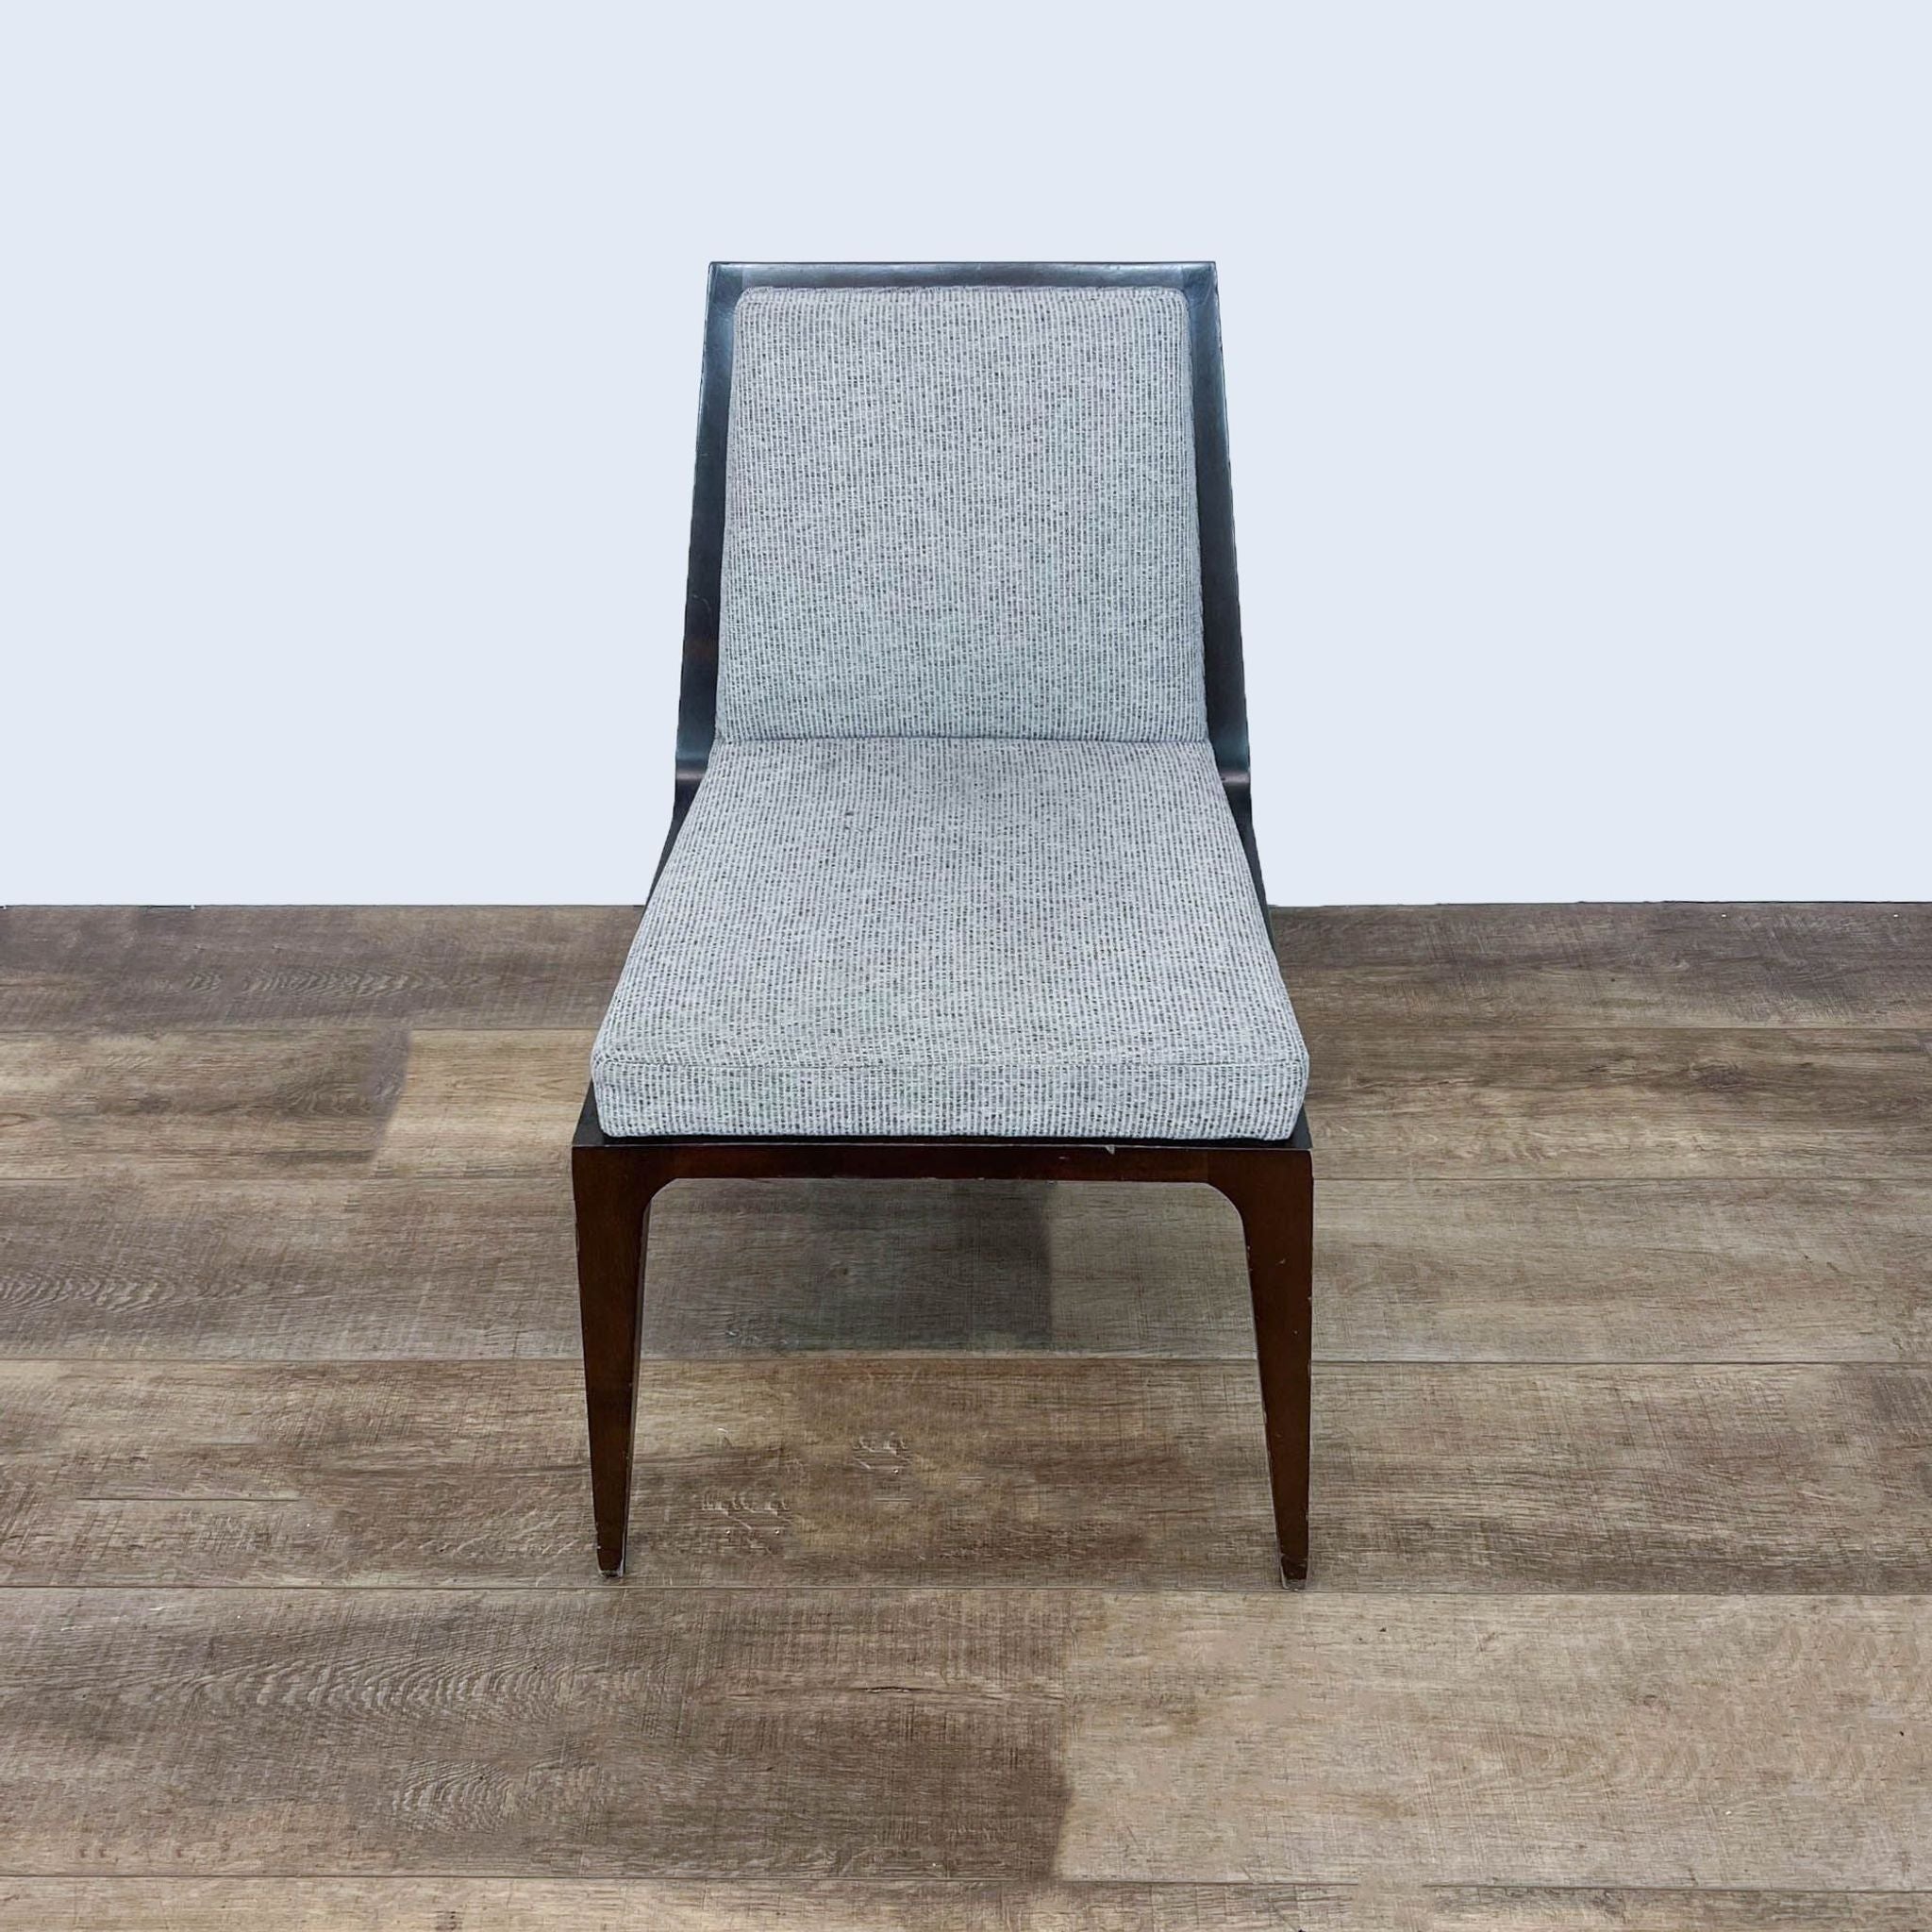 Kimball International dining chair with a sleek design and gray fabric on a wooden floor.